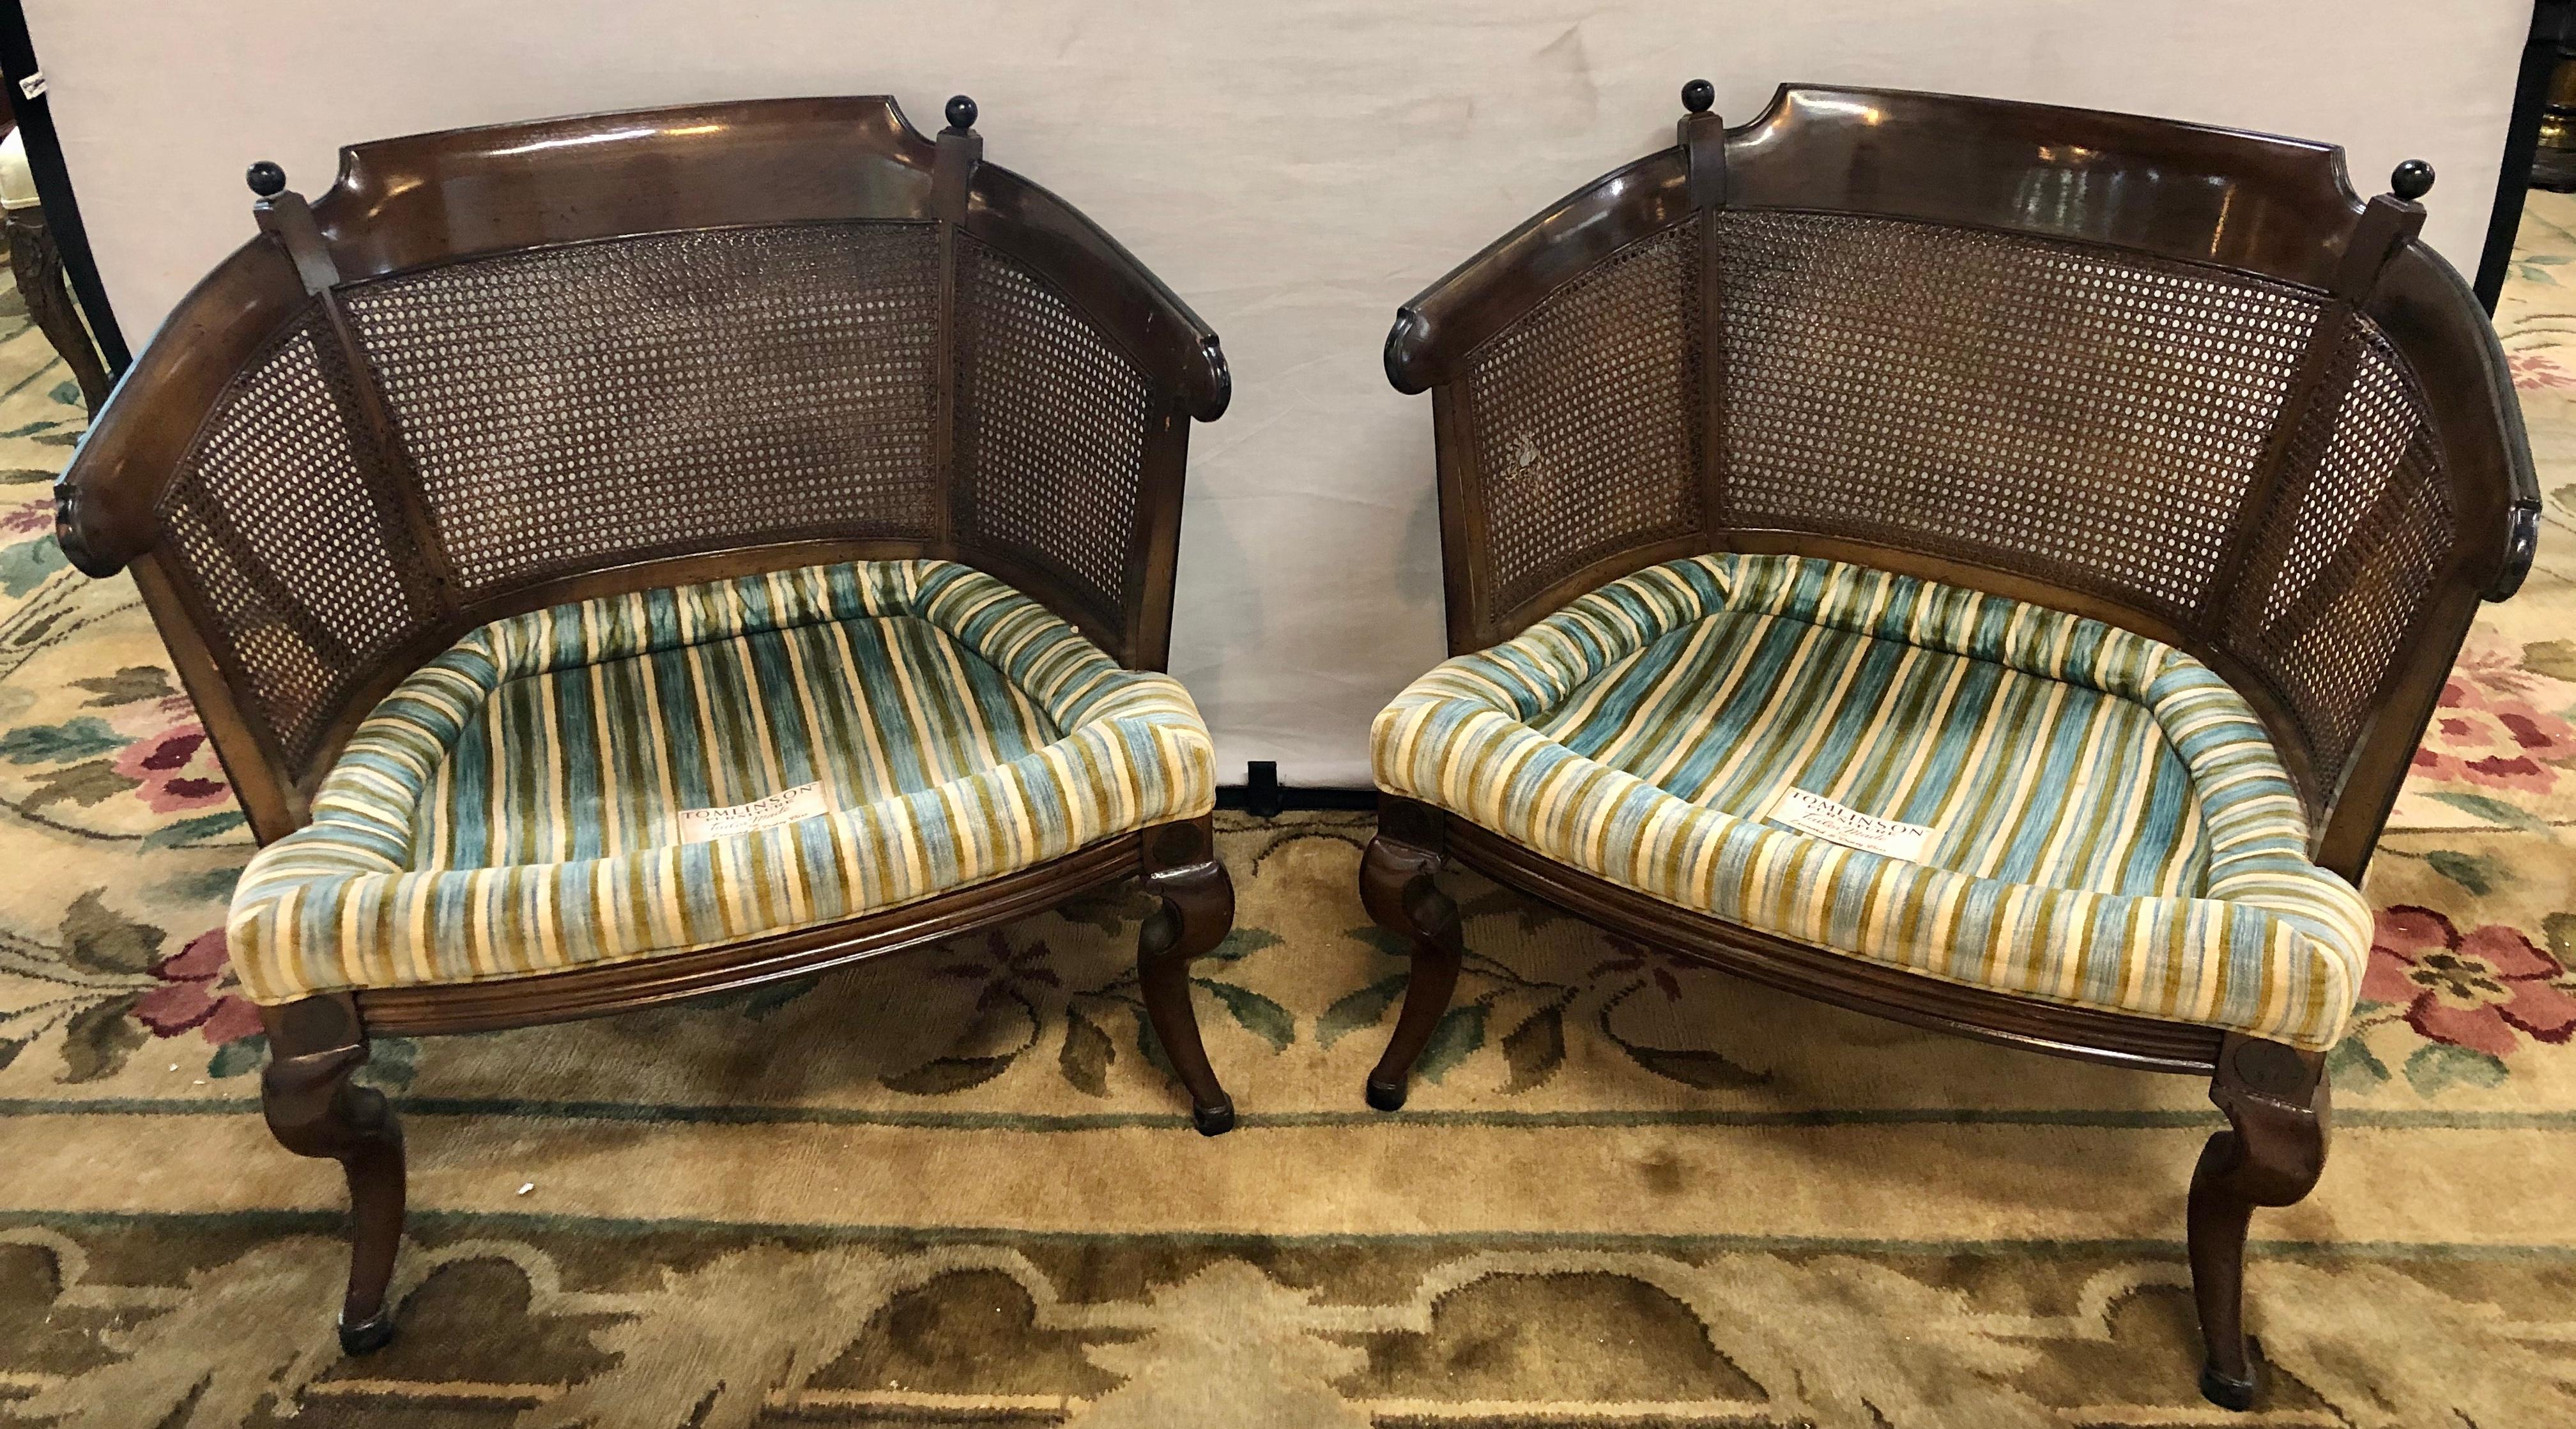 Pair of fine mahogany Tub chairs in striped upholstery with cushion. By Tomlinson Tailor Made for Leonard & Daisy Bisz. A simply stunning pair of arm chairs that are sleek and stylish. This fine set is certain to add sophistication to any room in